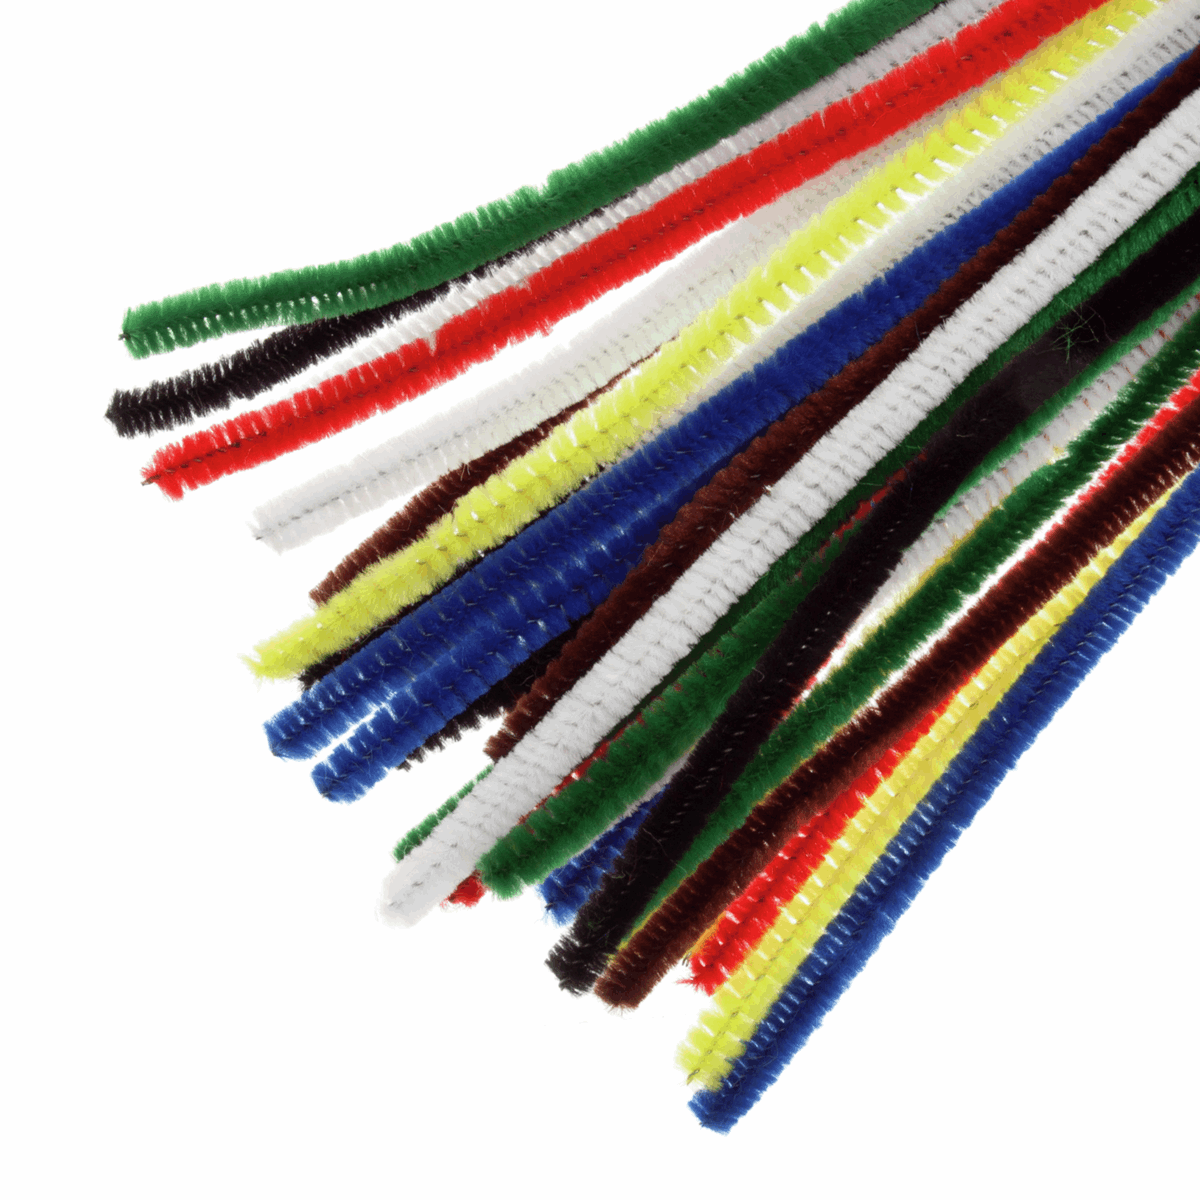 Chenille Sticks 4mm x 15cm - Assorted Colours (Box of 1000)